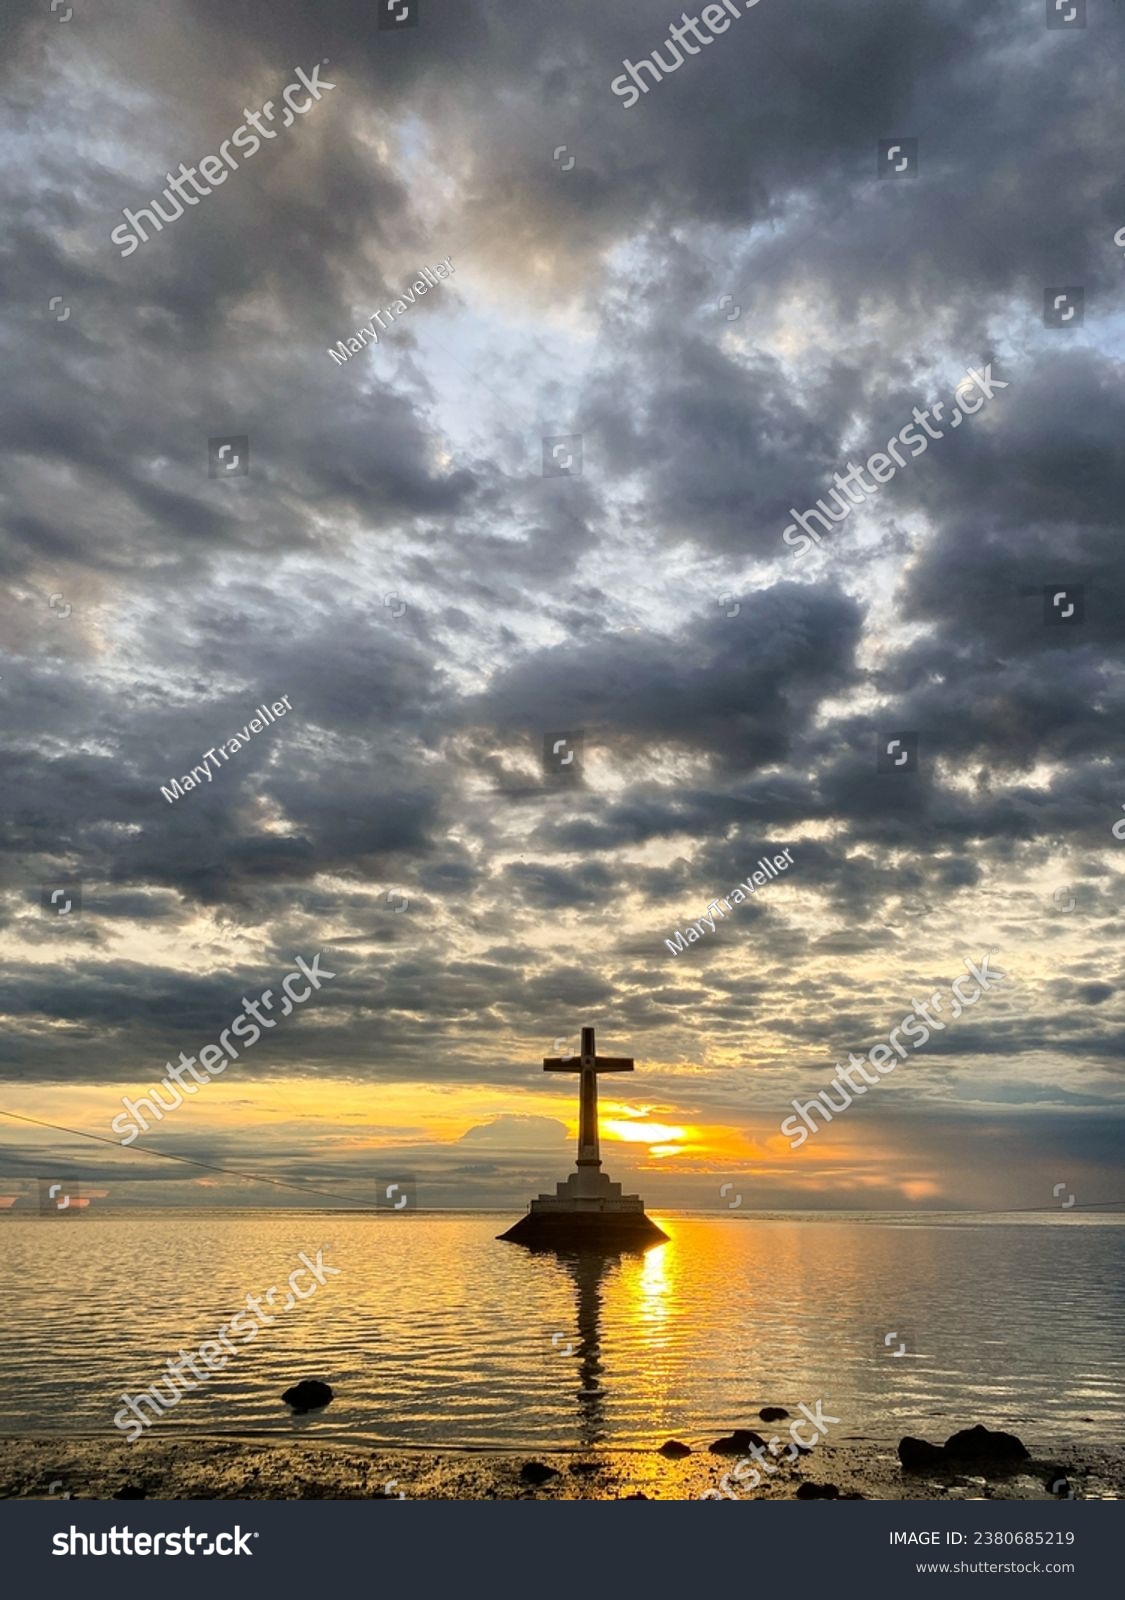 Sunset over the Sunken Cemetery. Beautiful sky and clouds. Camiguin Island. Philippines. #2380685219